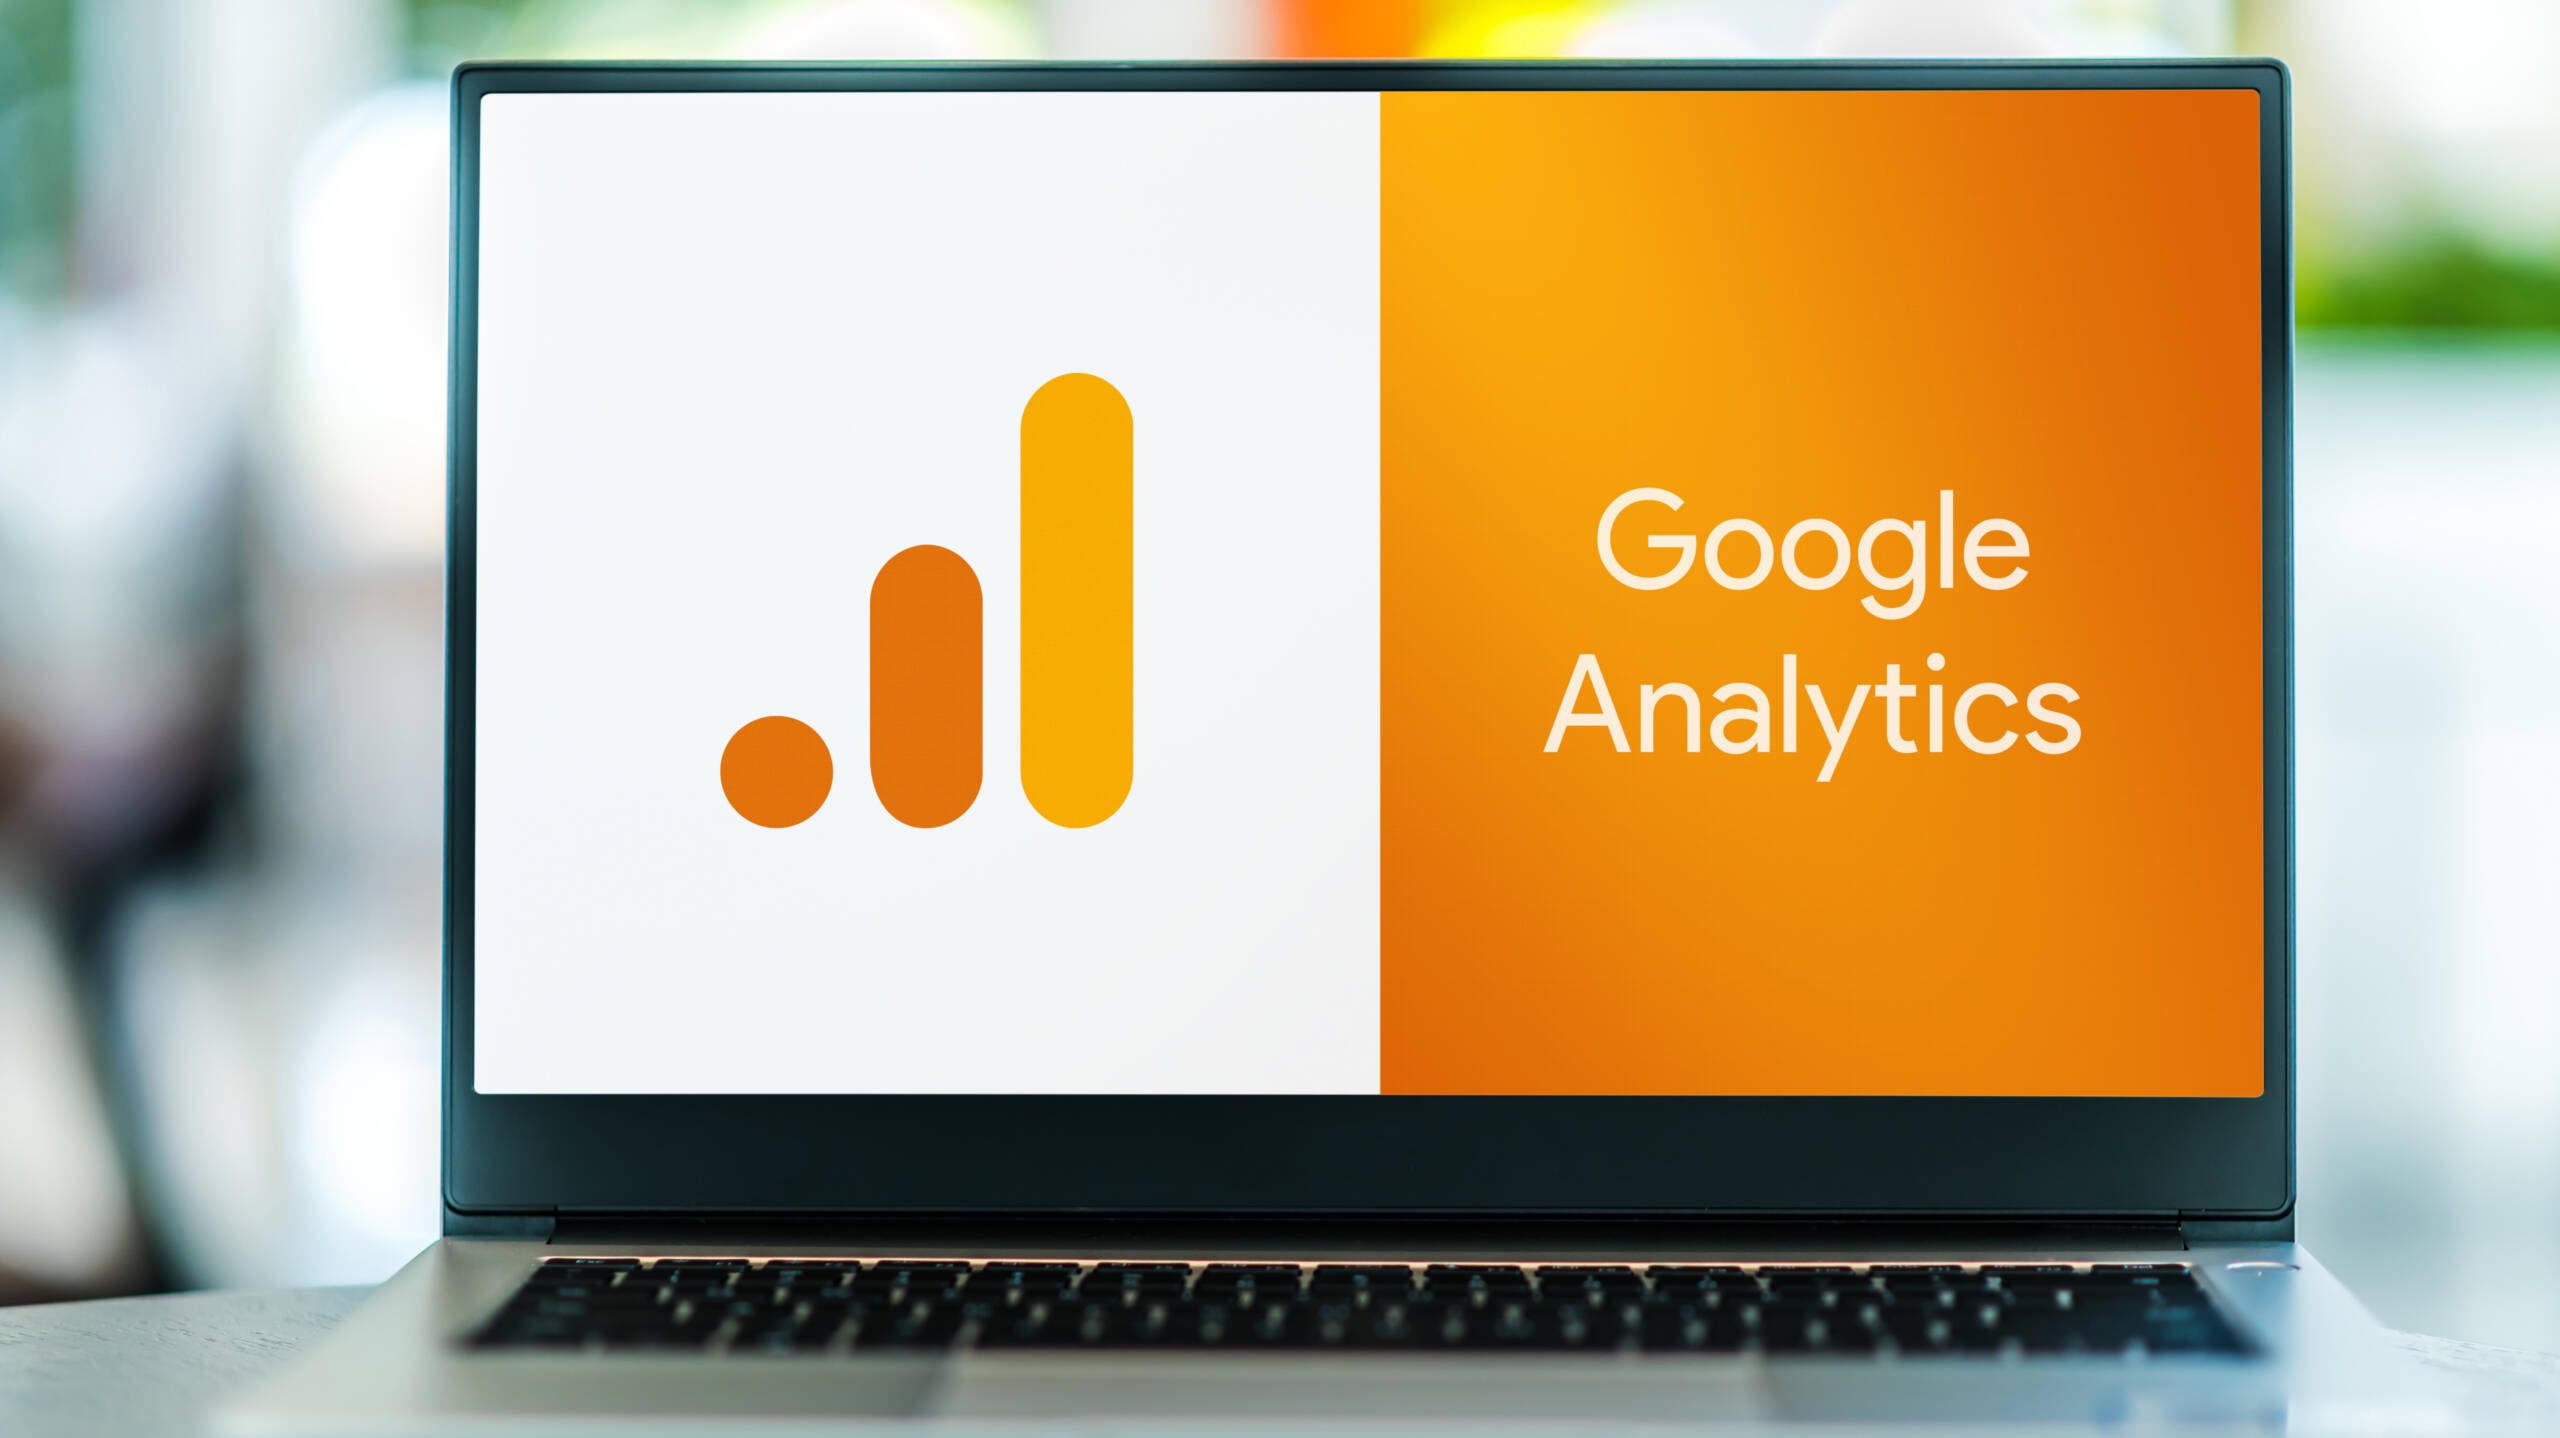 How may Google Analytics 4 be implemented?